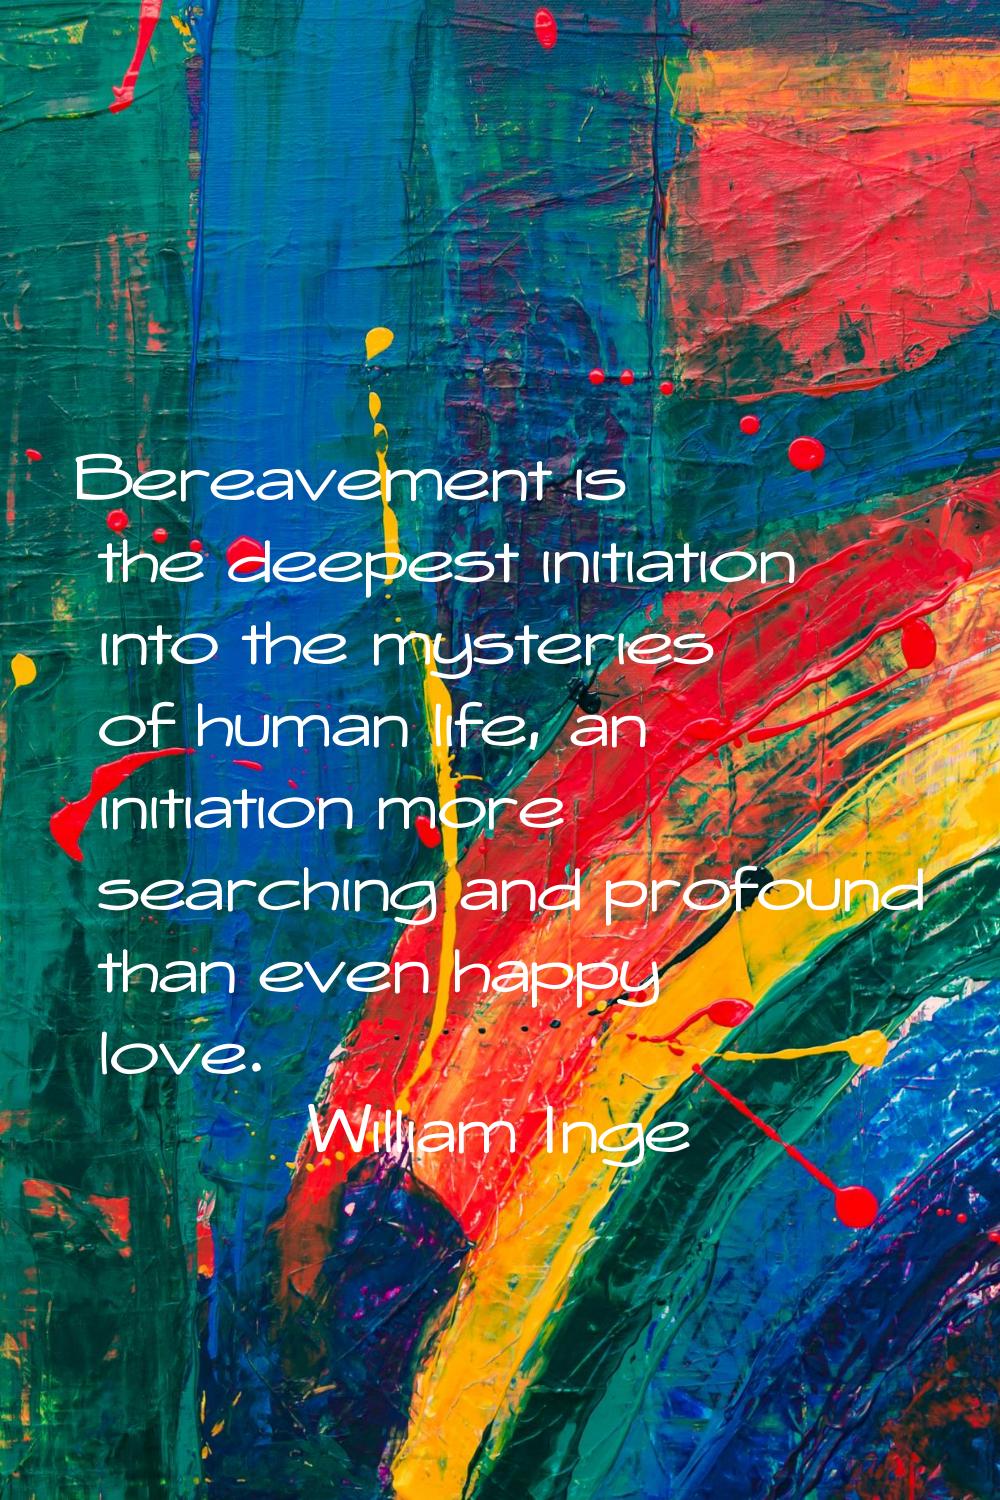 Bereavement is the deepest initiation into the mysteries of human life, an initiation more searchin